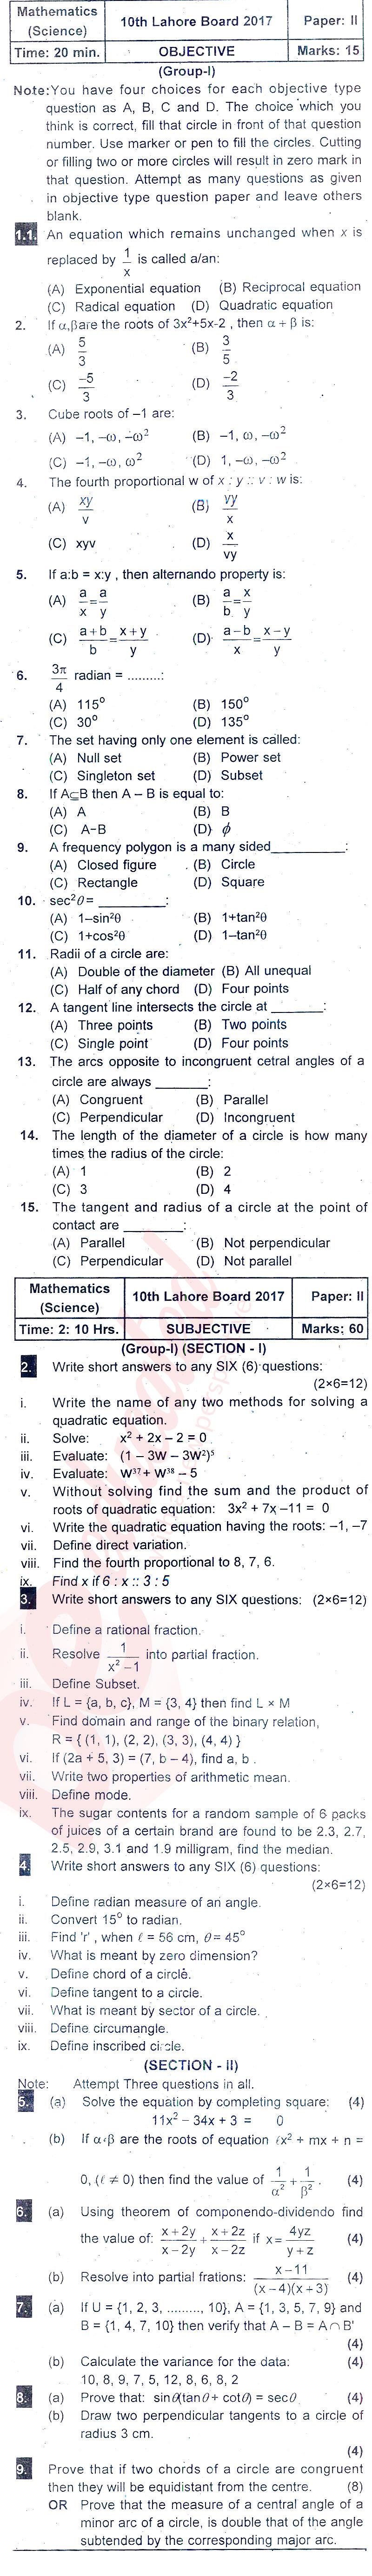 Math 10th class Past Paper Group 1 BISE Lahore 2017